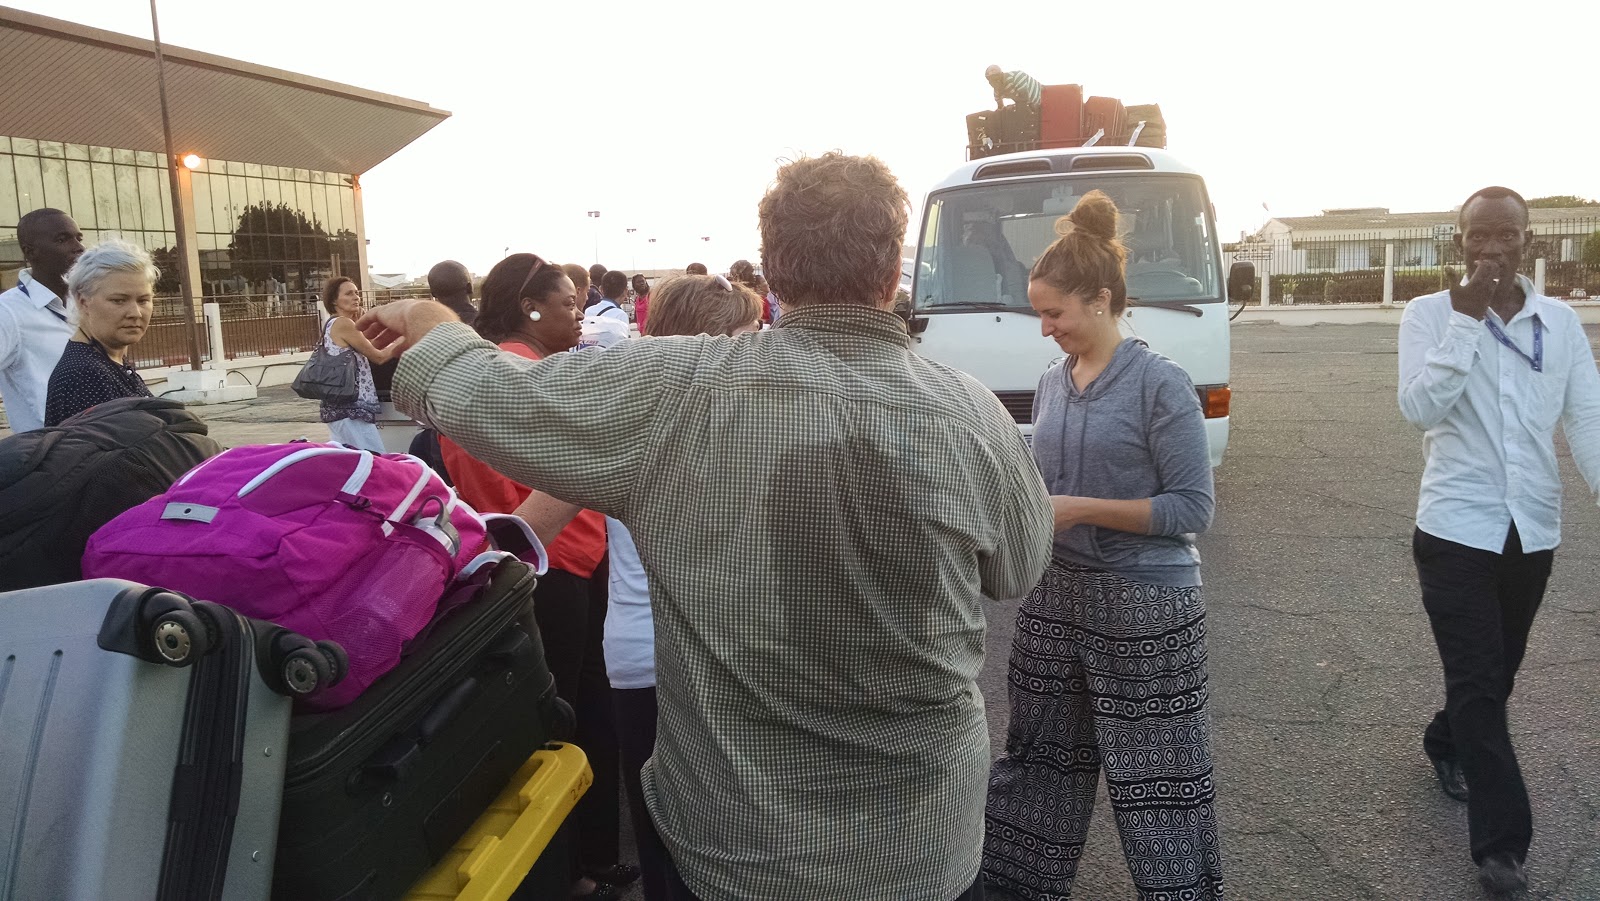 Crowd of people in a parking lot with lots of luggage with a white bus